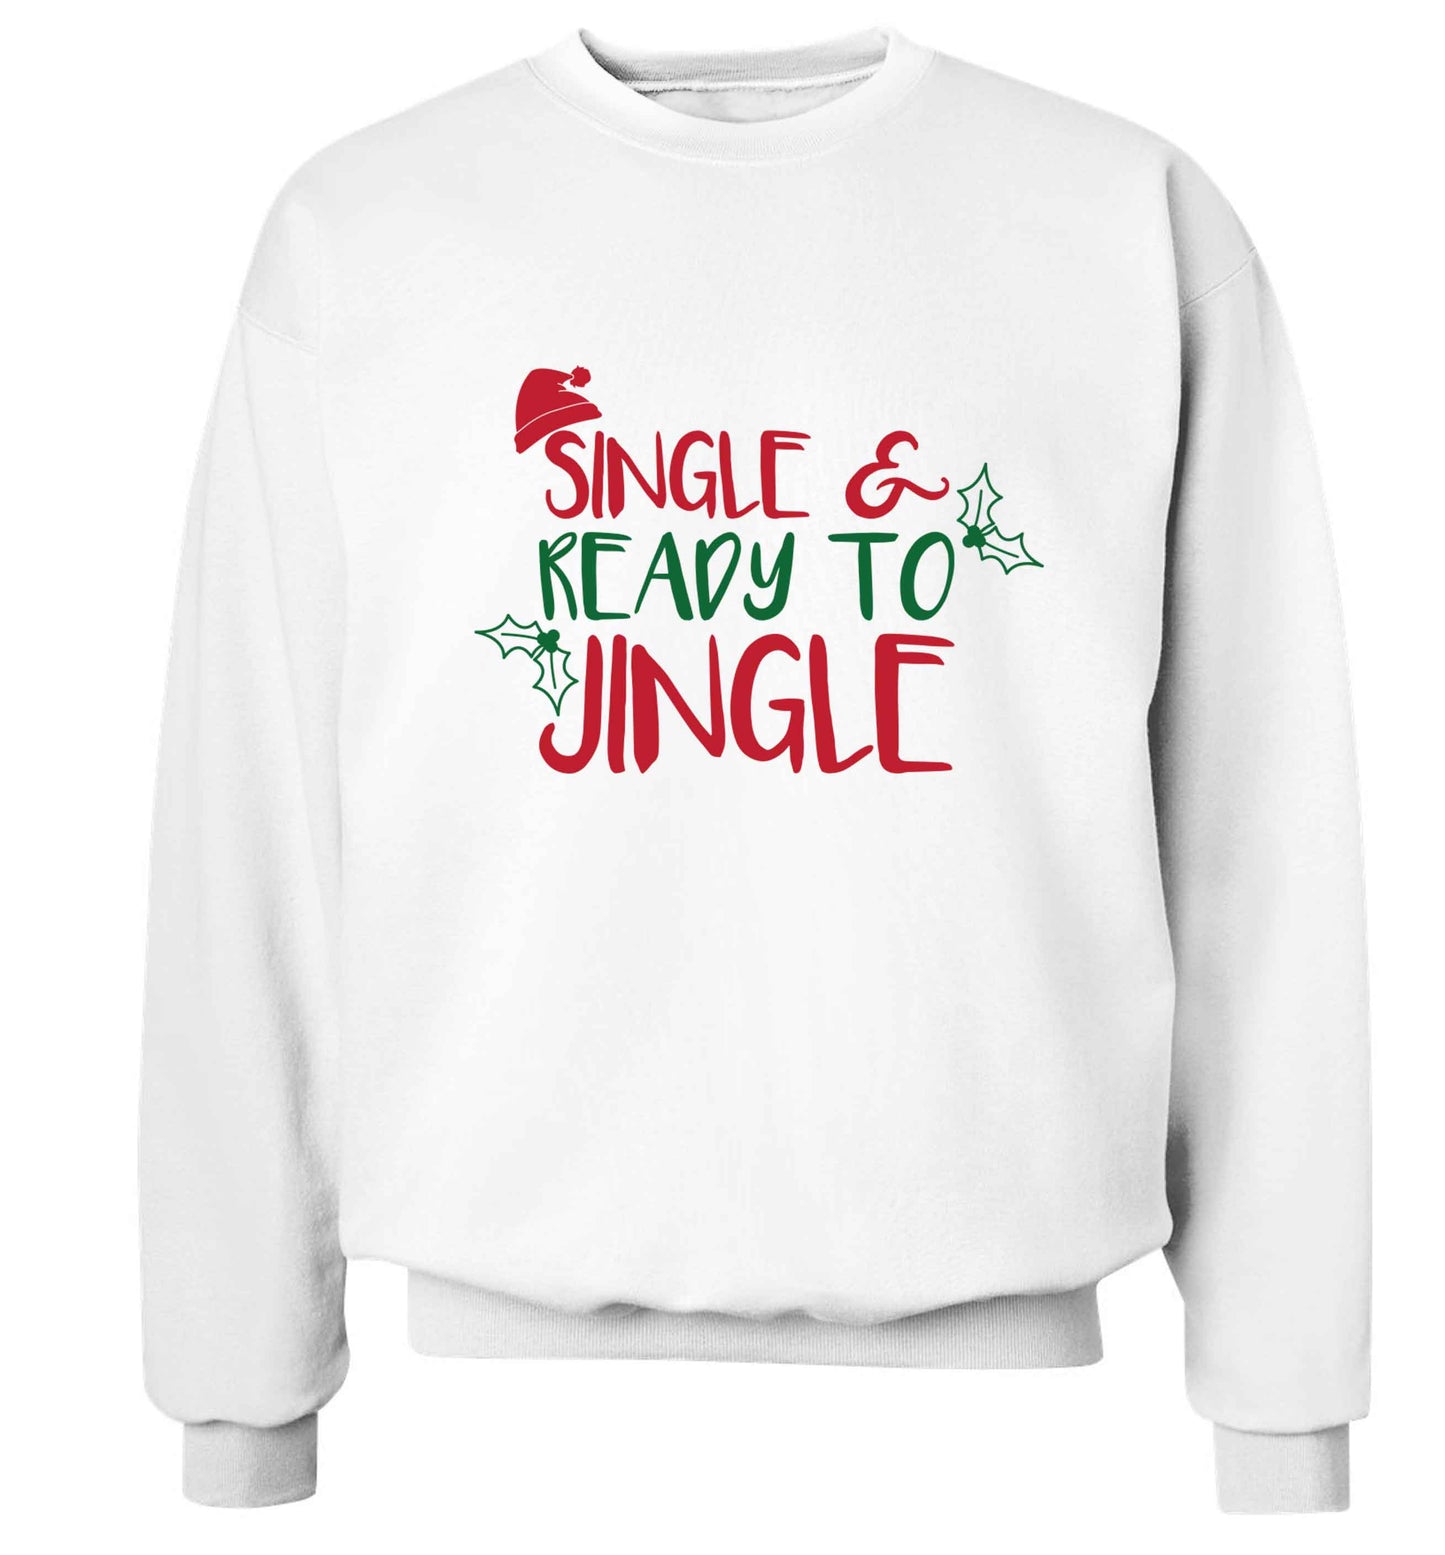 Single and ready to jingle Adult's unisex white Sweater 2XL